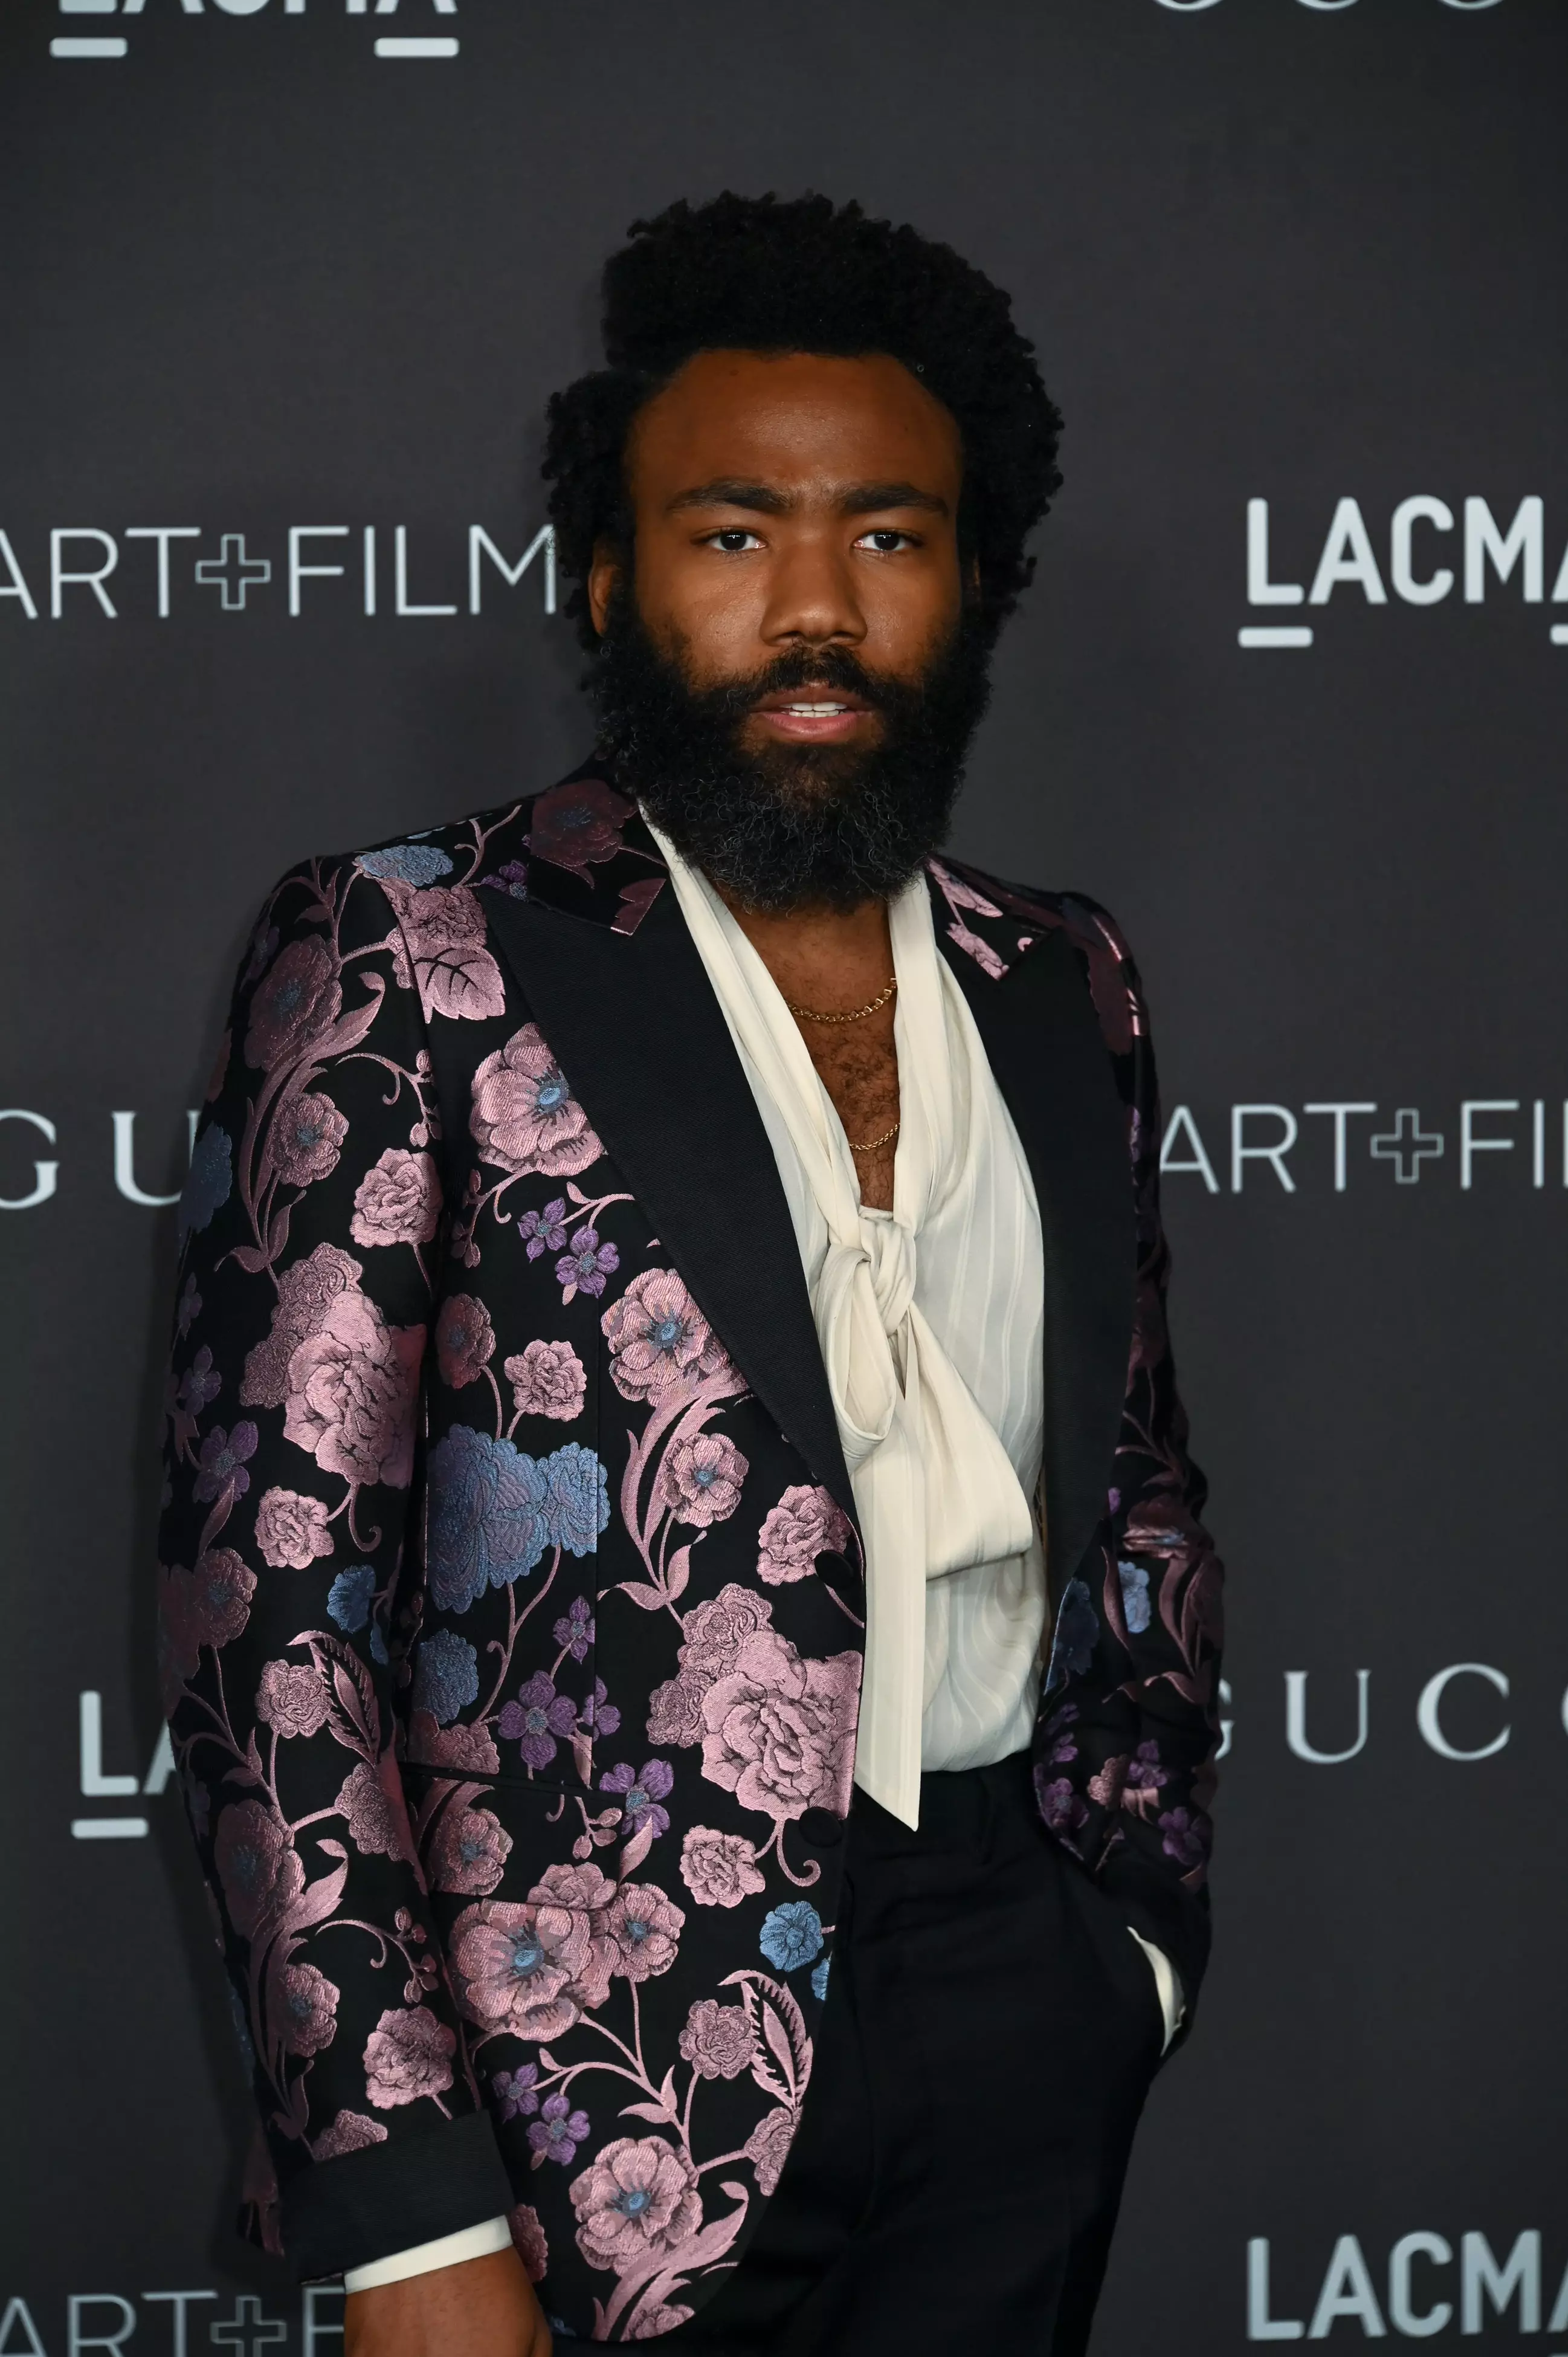 Donald Glover created the acclaimed series Atlanta (